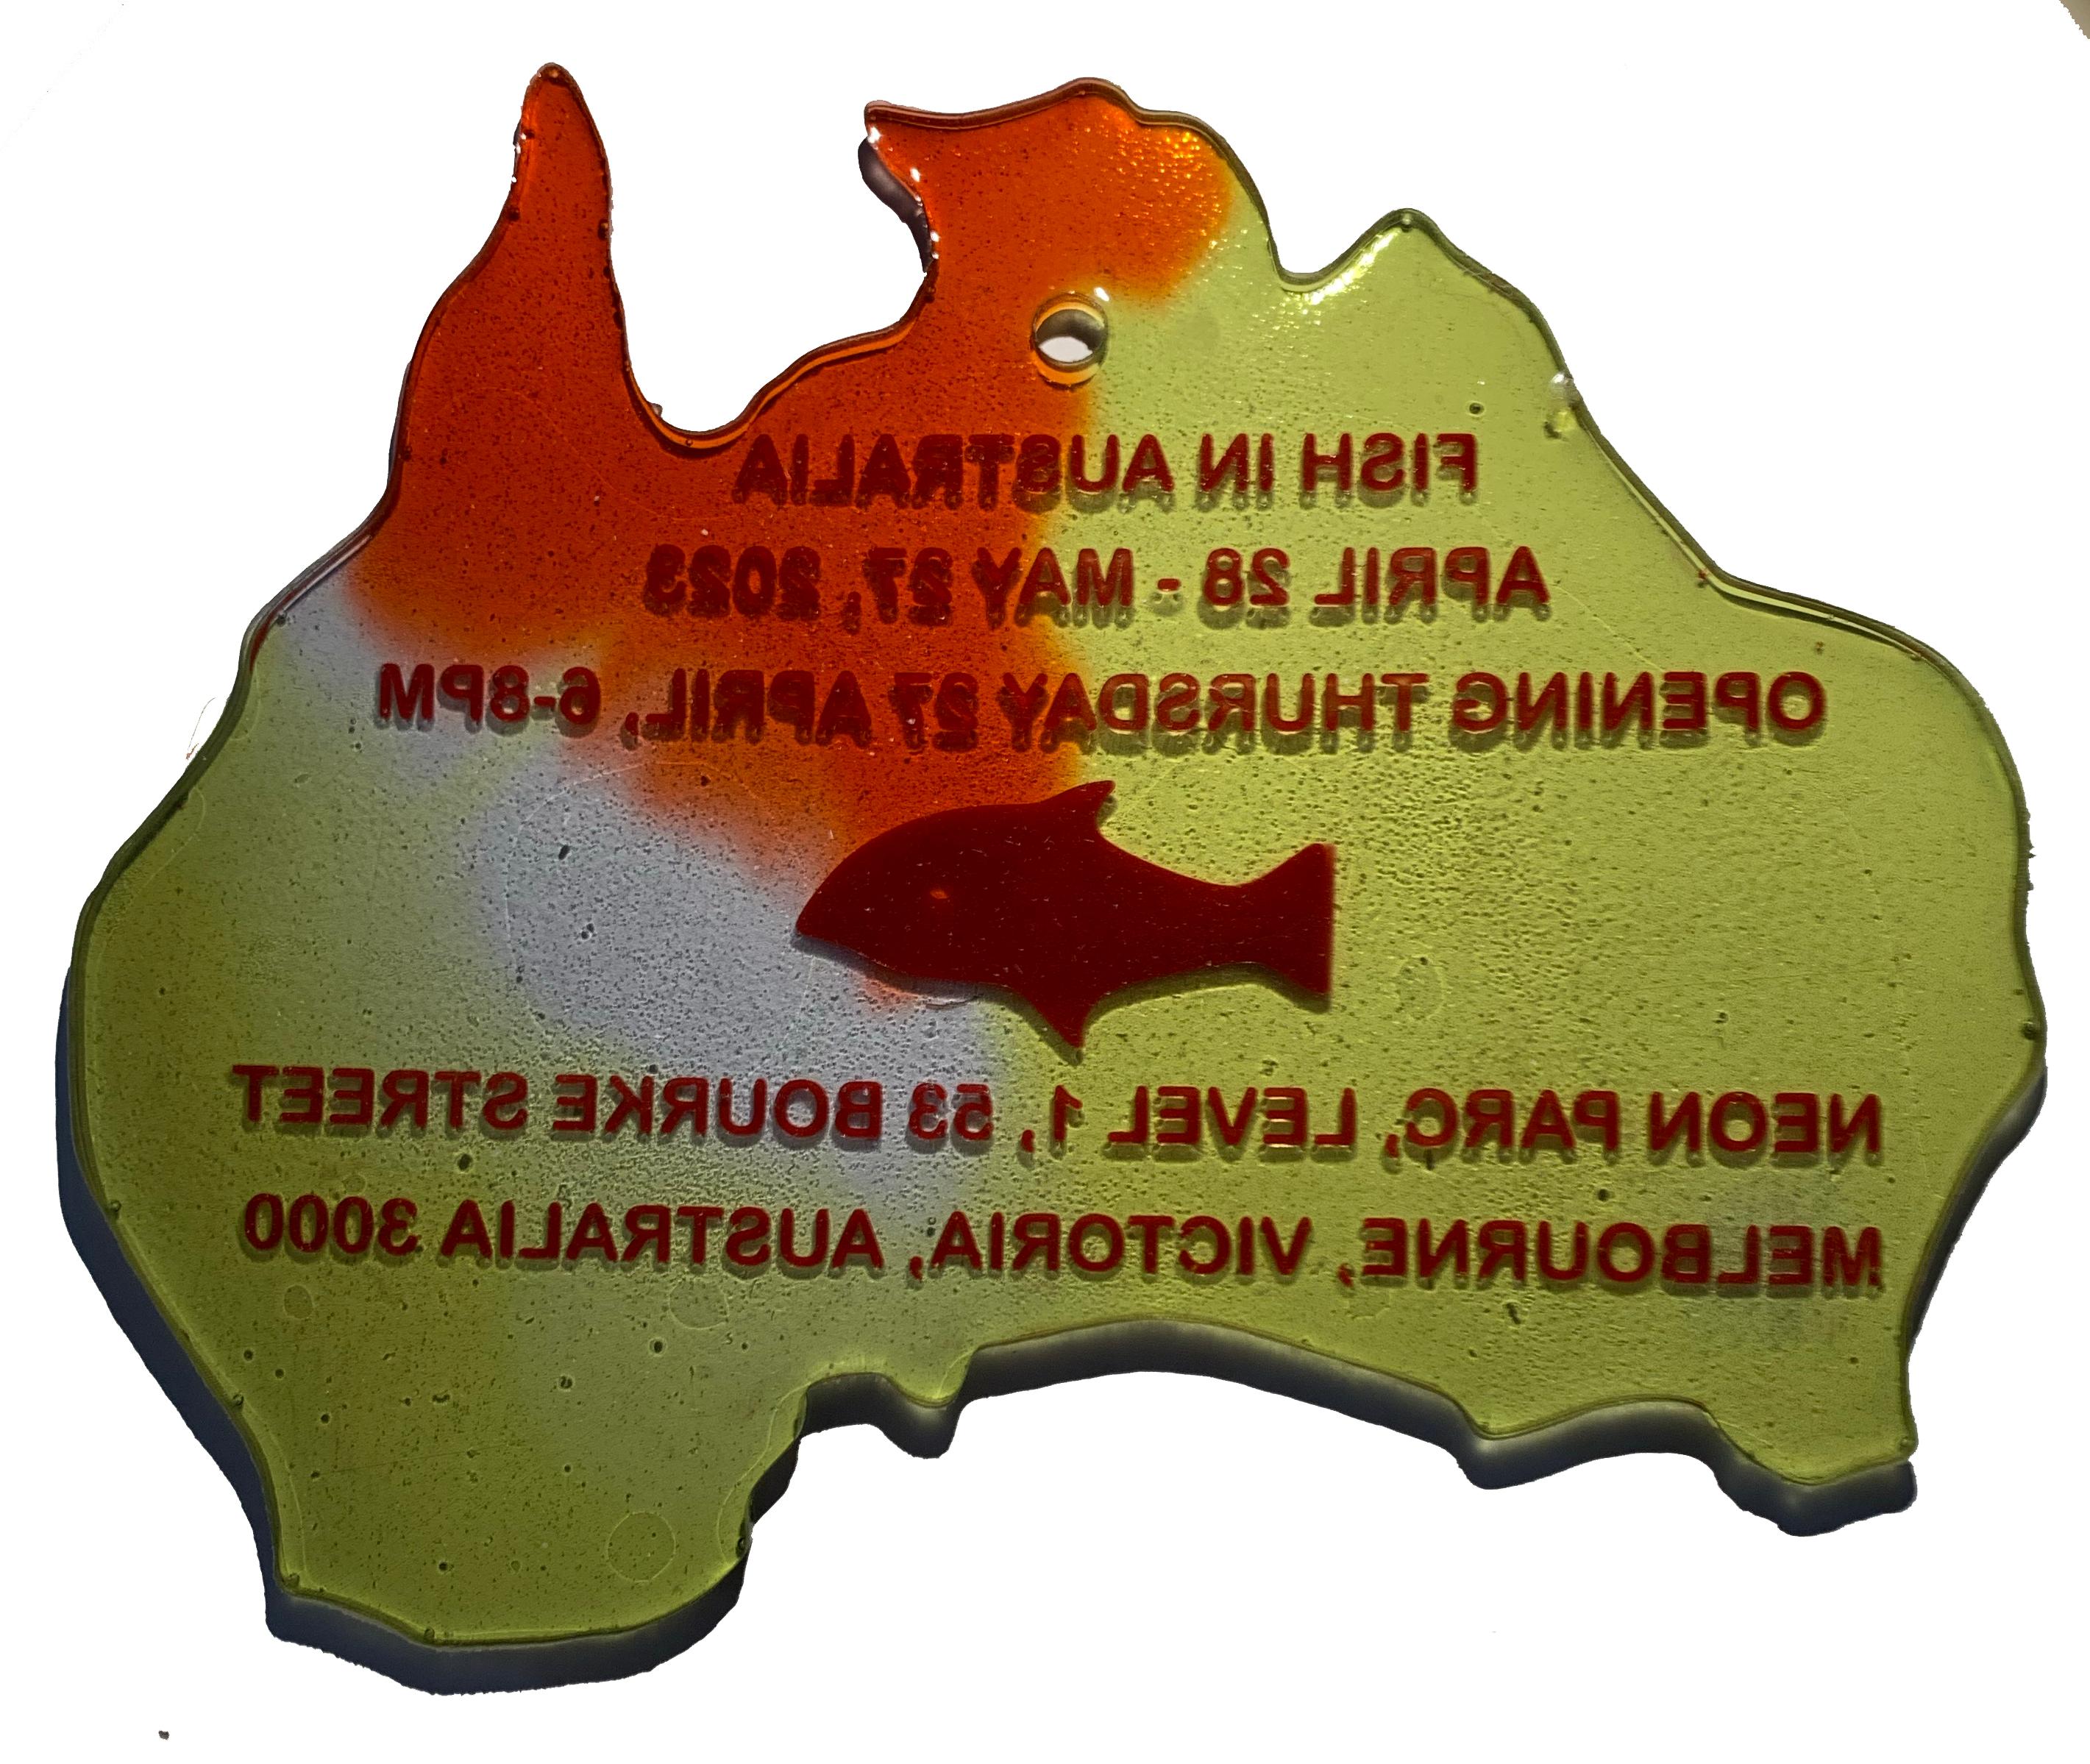 We've shown you the oldest of the Pesce resin invitations and now here's one of the newest: Fish In Australia. Created in the shape of that faraway continent, this largely red and yellow invitation features a red fish applied to its center. The